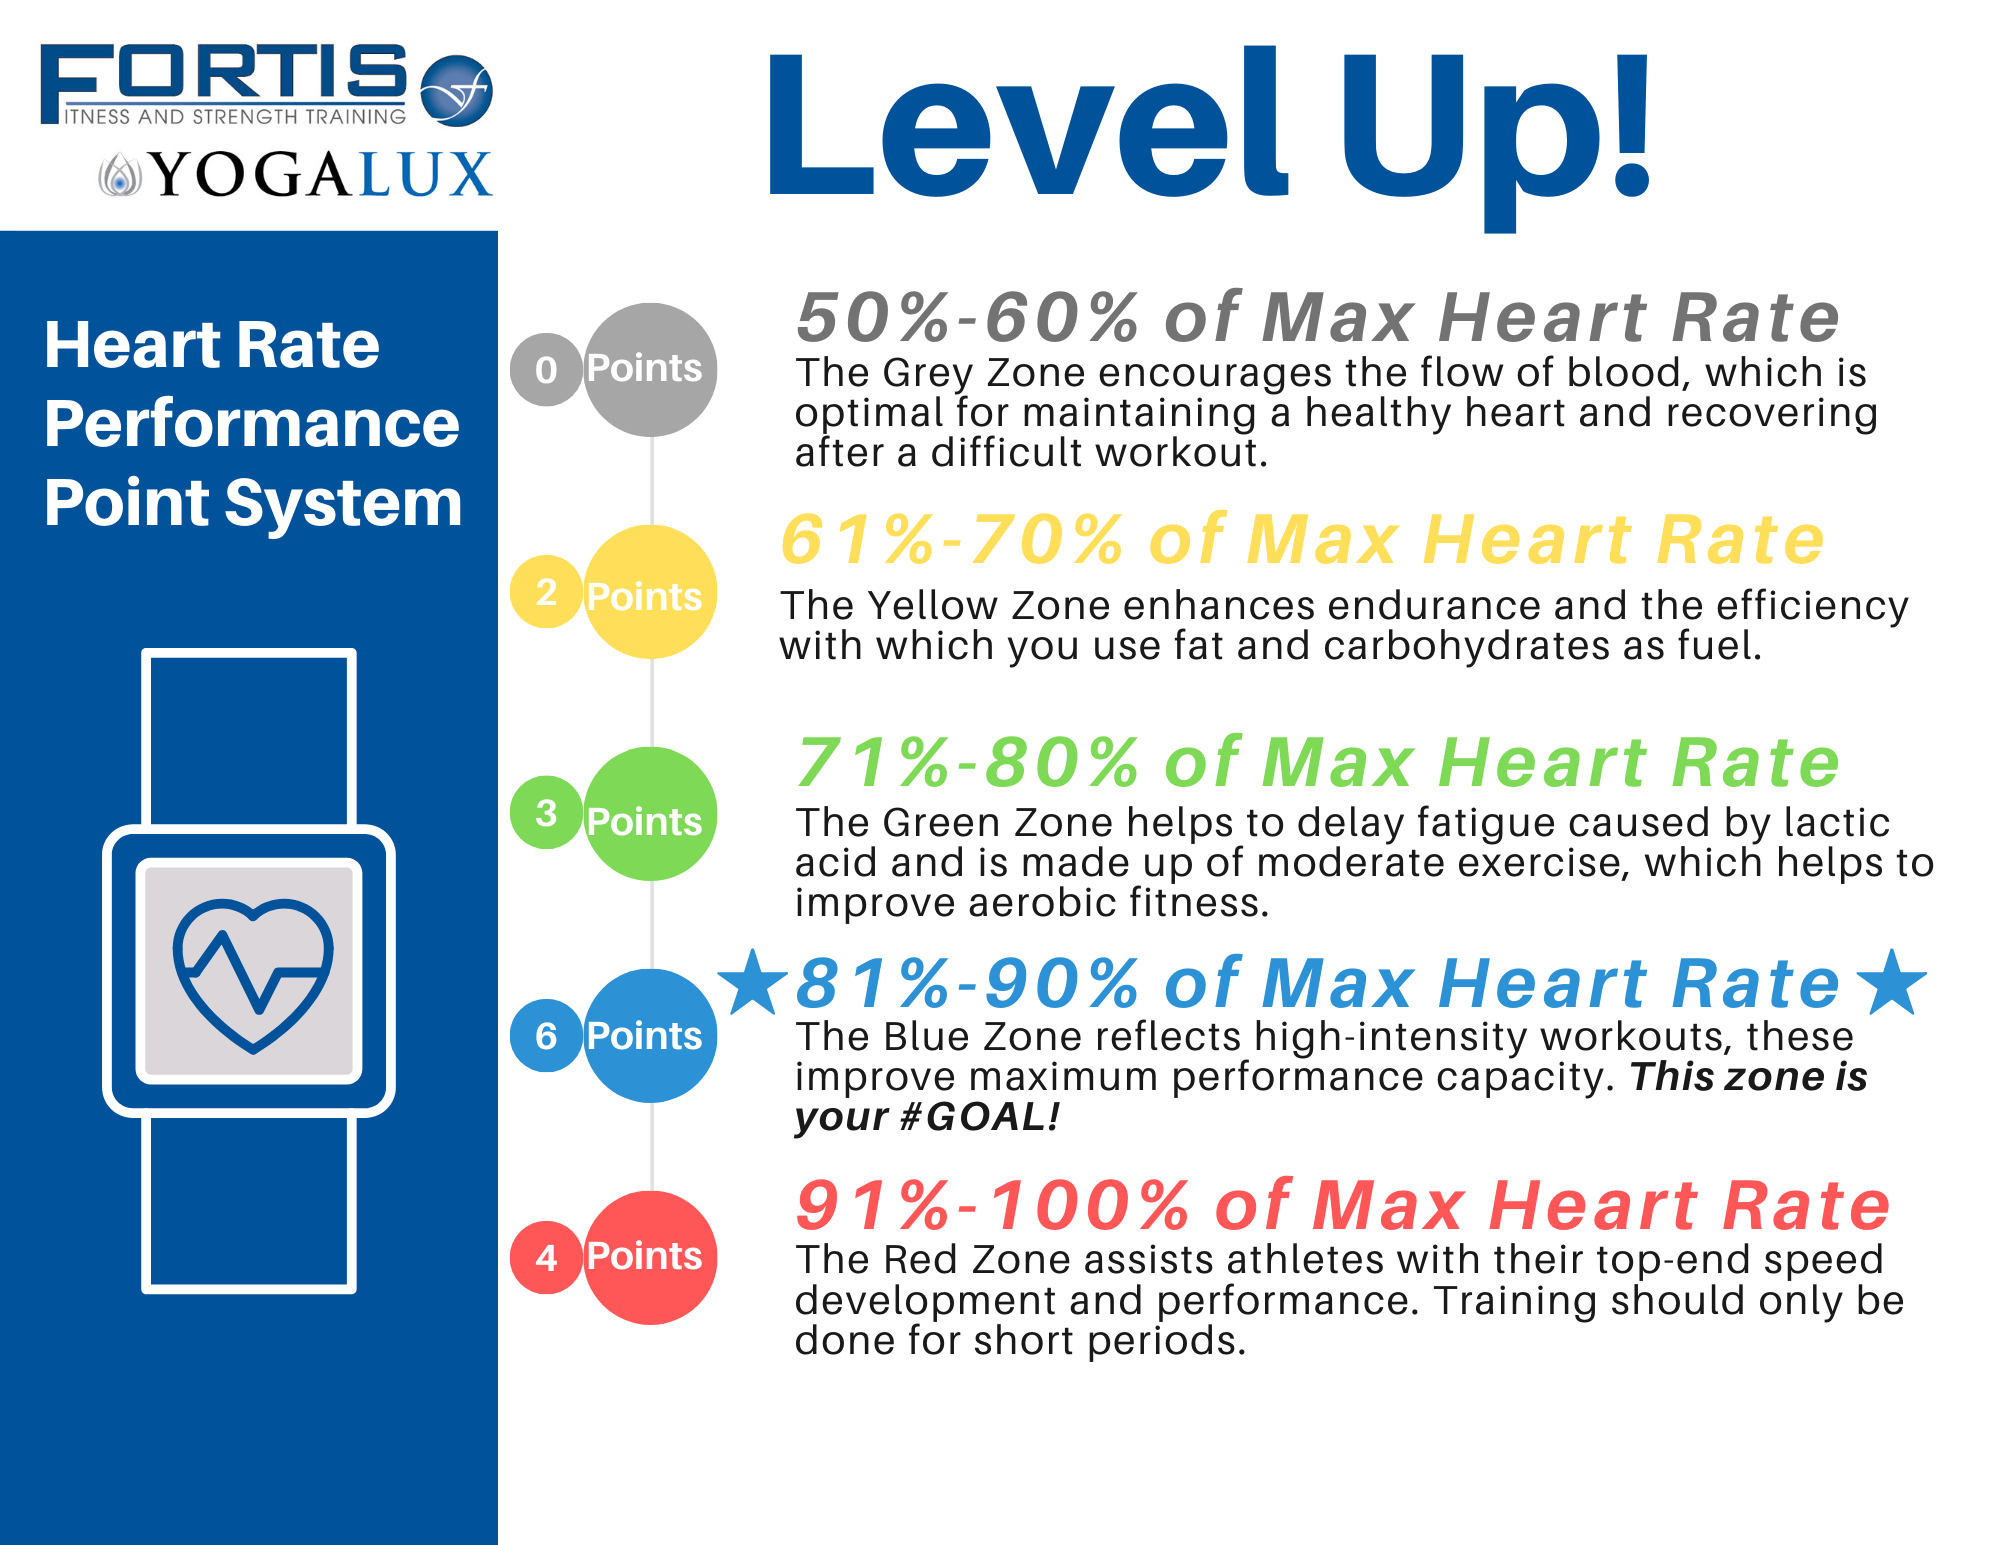 Level Up - Heart Rate tracking